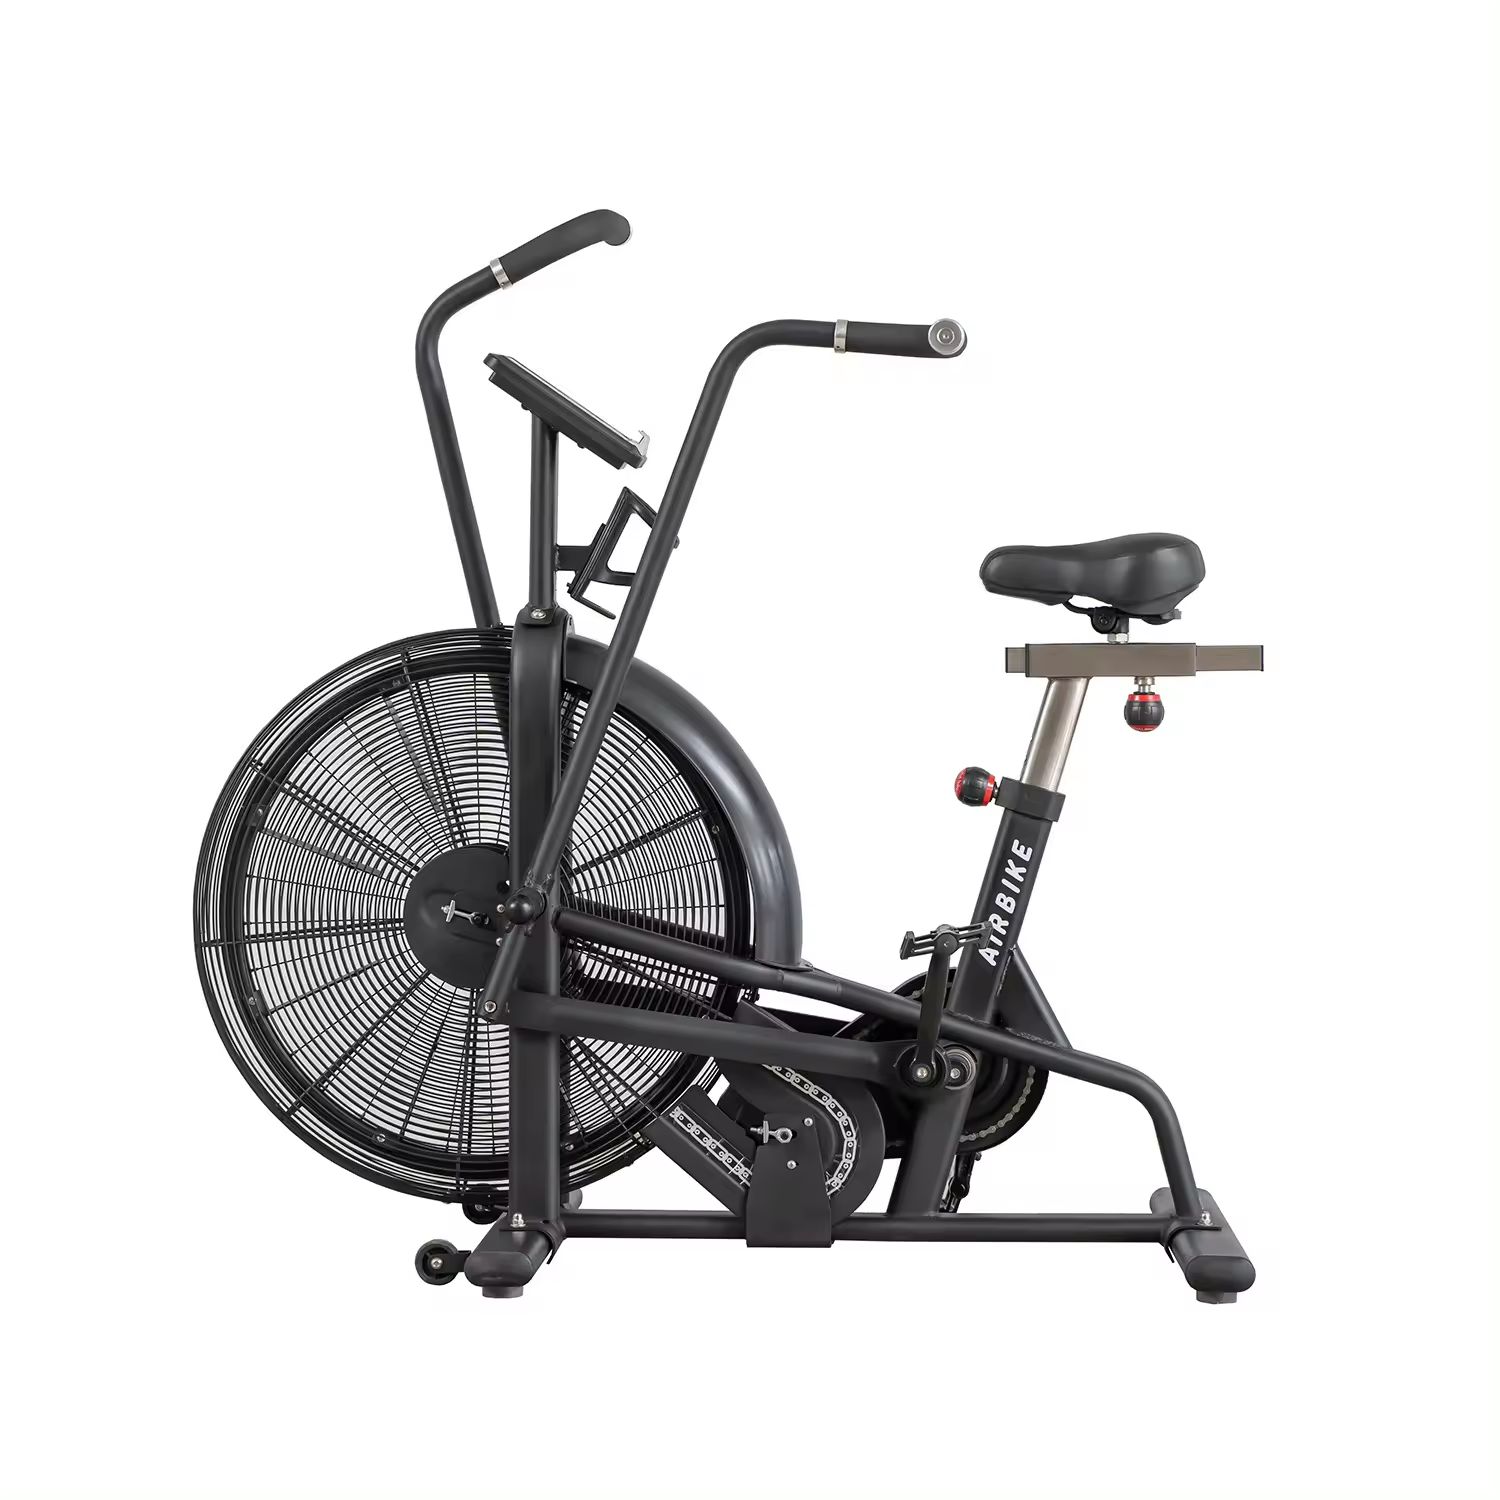 Hot Sale Upright Air Bike Commercial Exercise Bike Cardio Machine Fitness Equipment